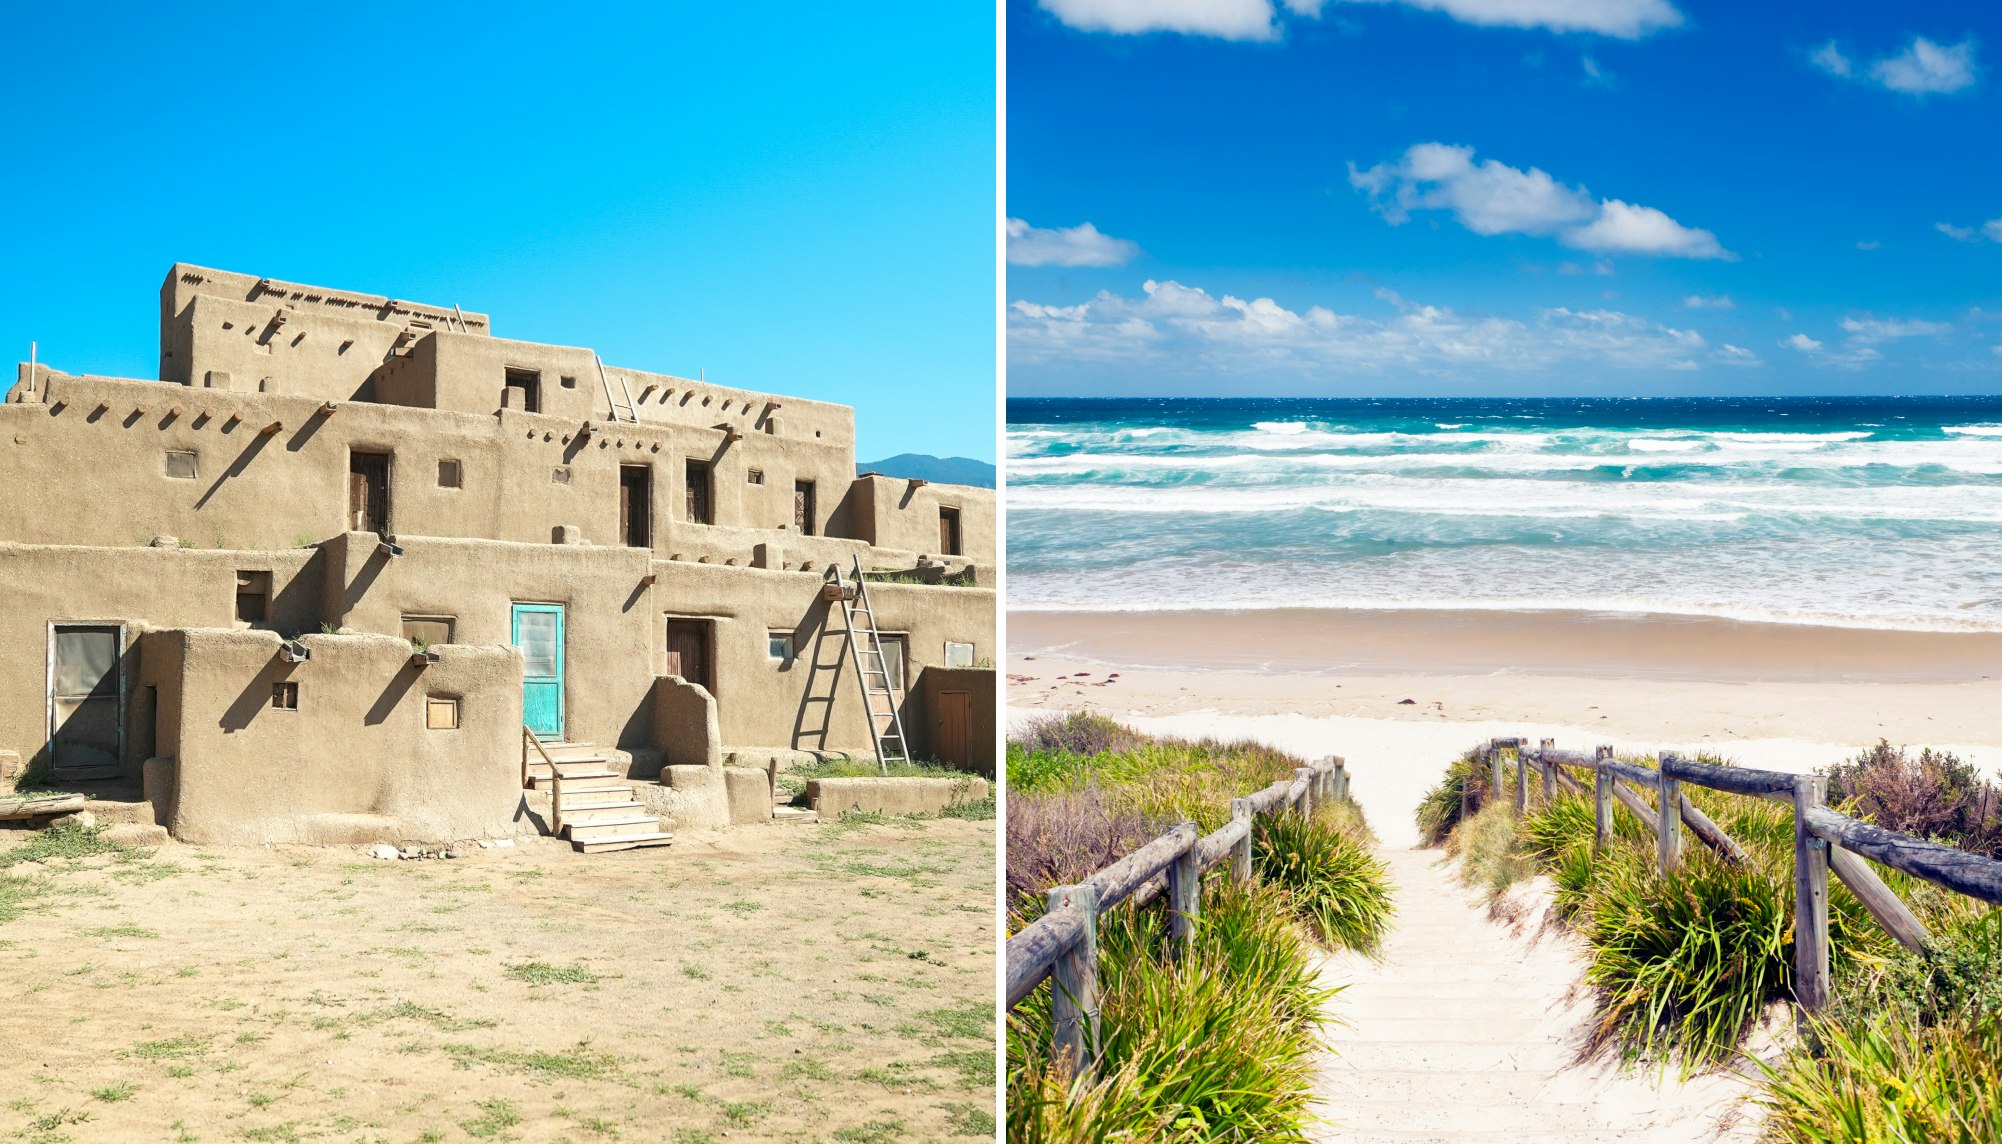 New Mexico combines culture and outdoors; hit the coast on an Australian road trip through New South Wales. 